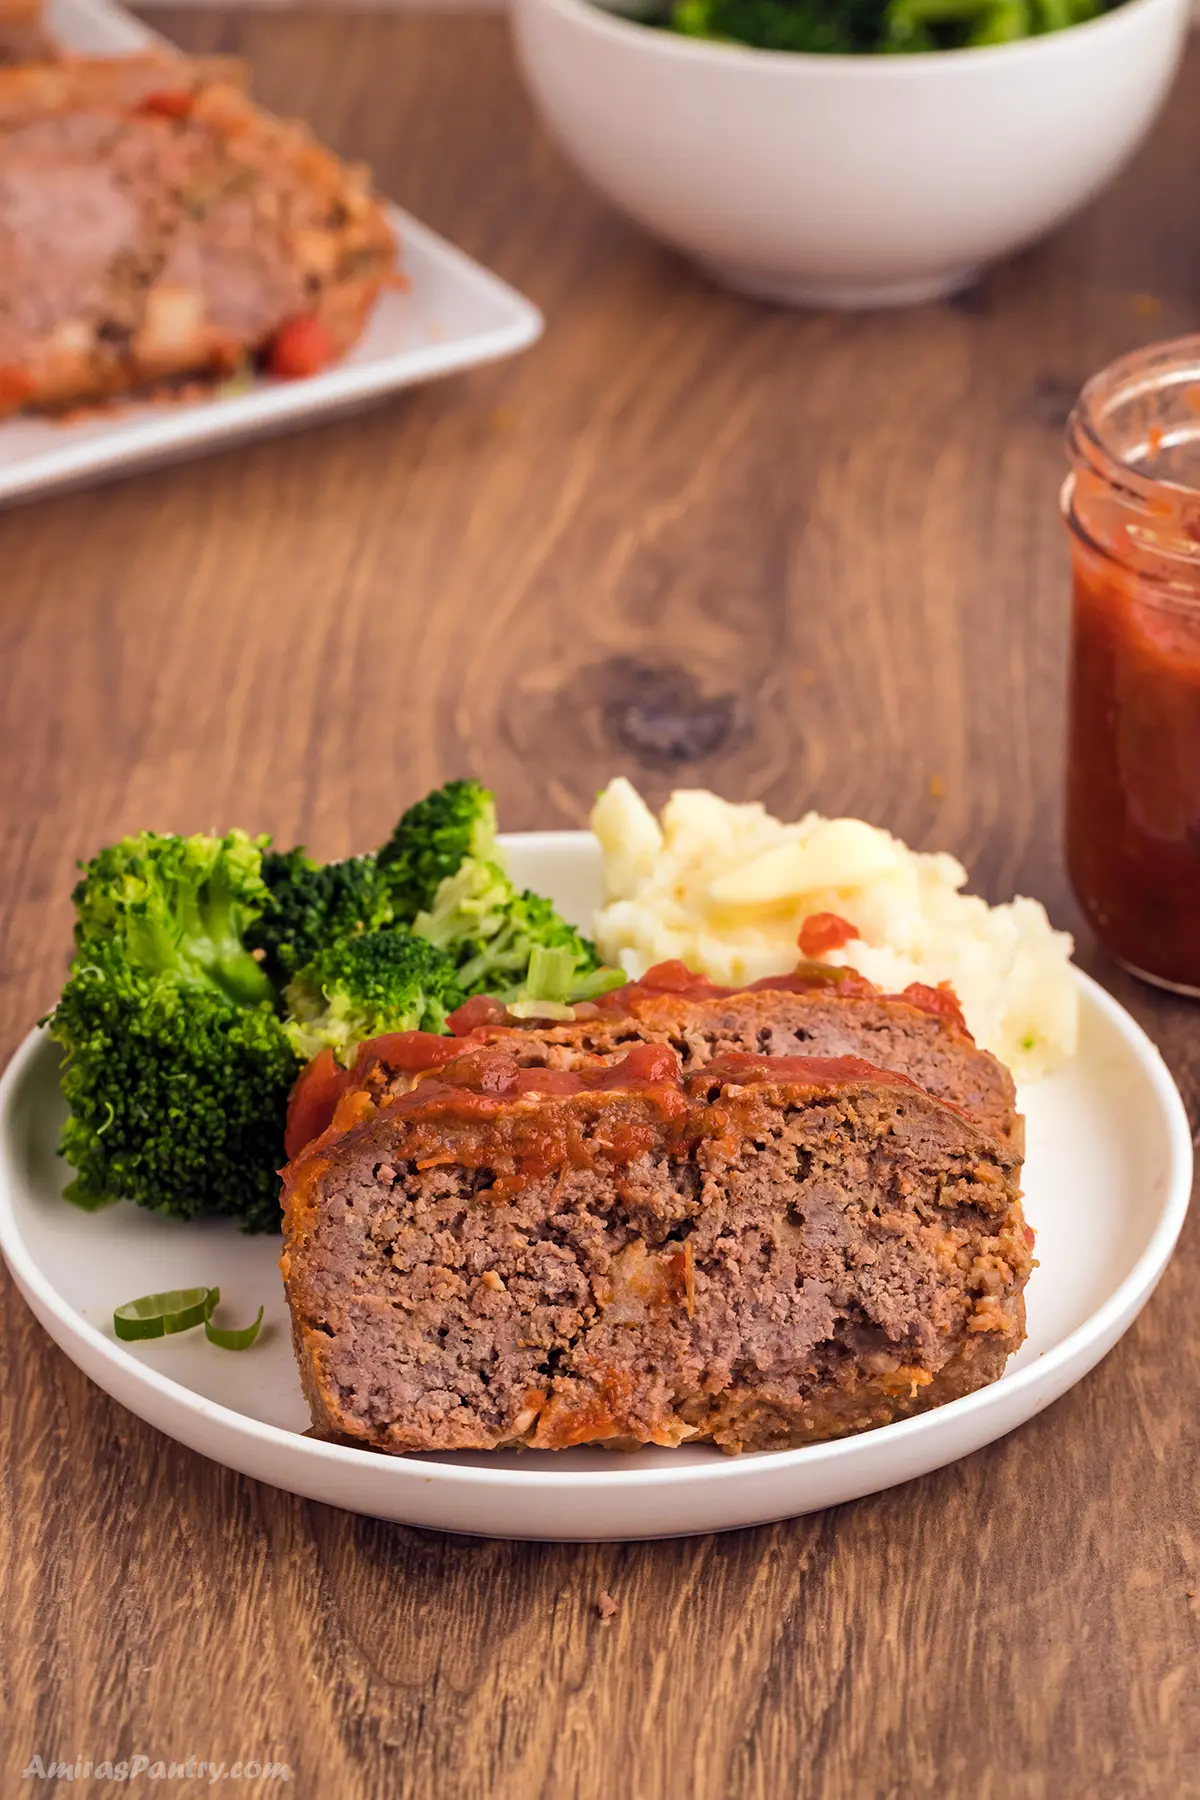 Meatloaf slices on a white plate with broccoli and mashed potatoes.